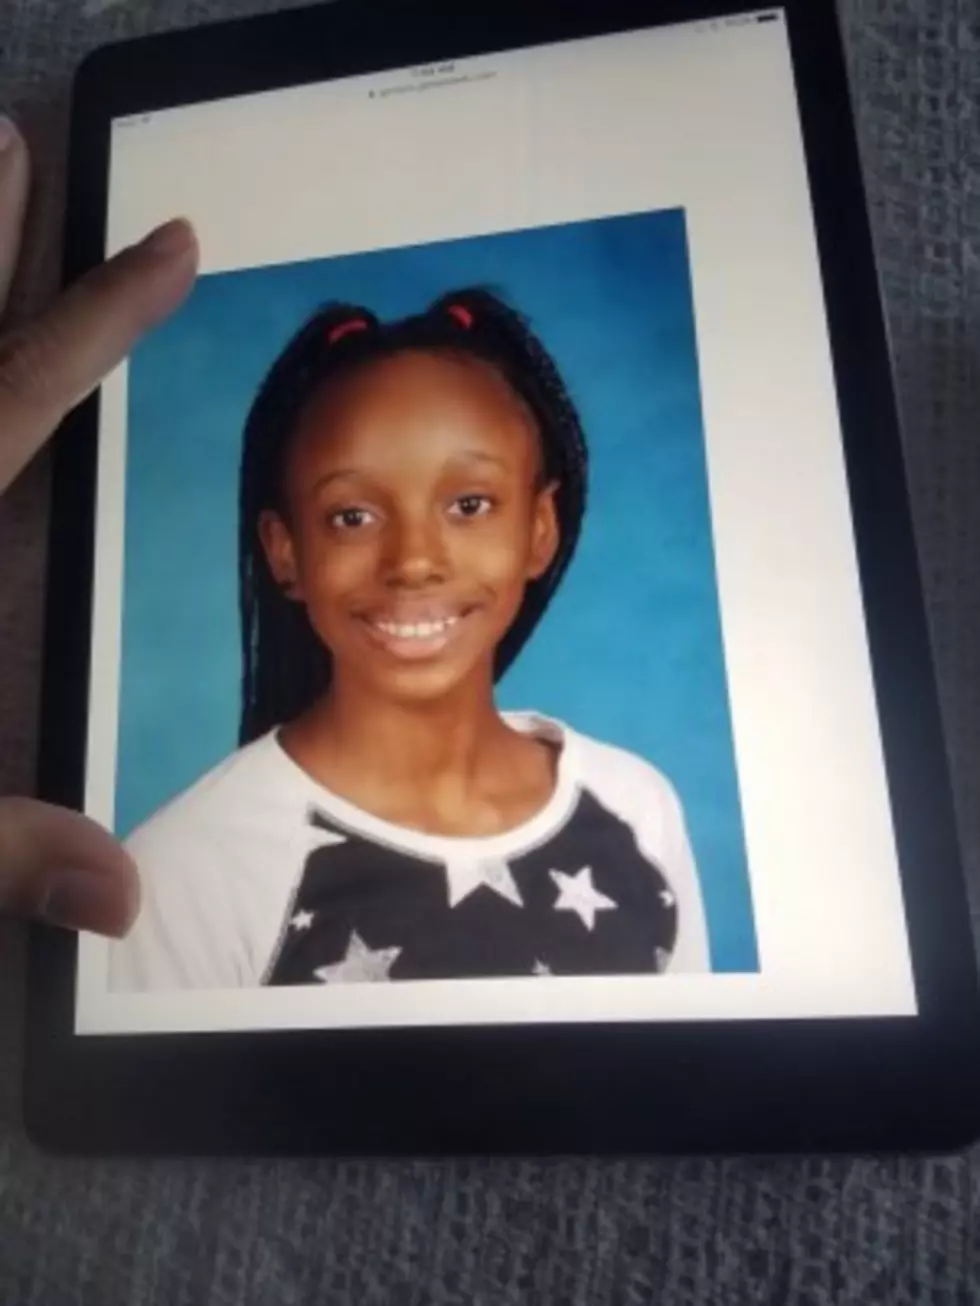 Keansburg 11-year old goes missing on Wednesday night